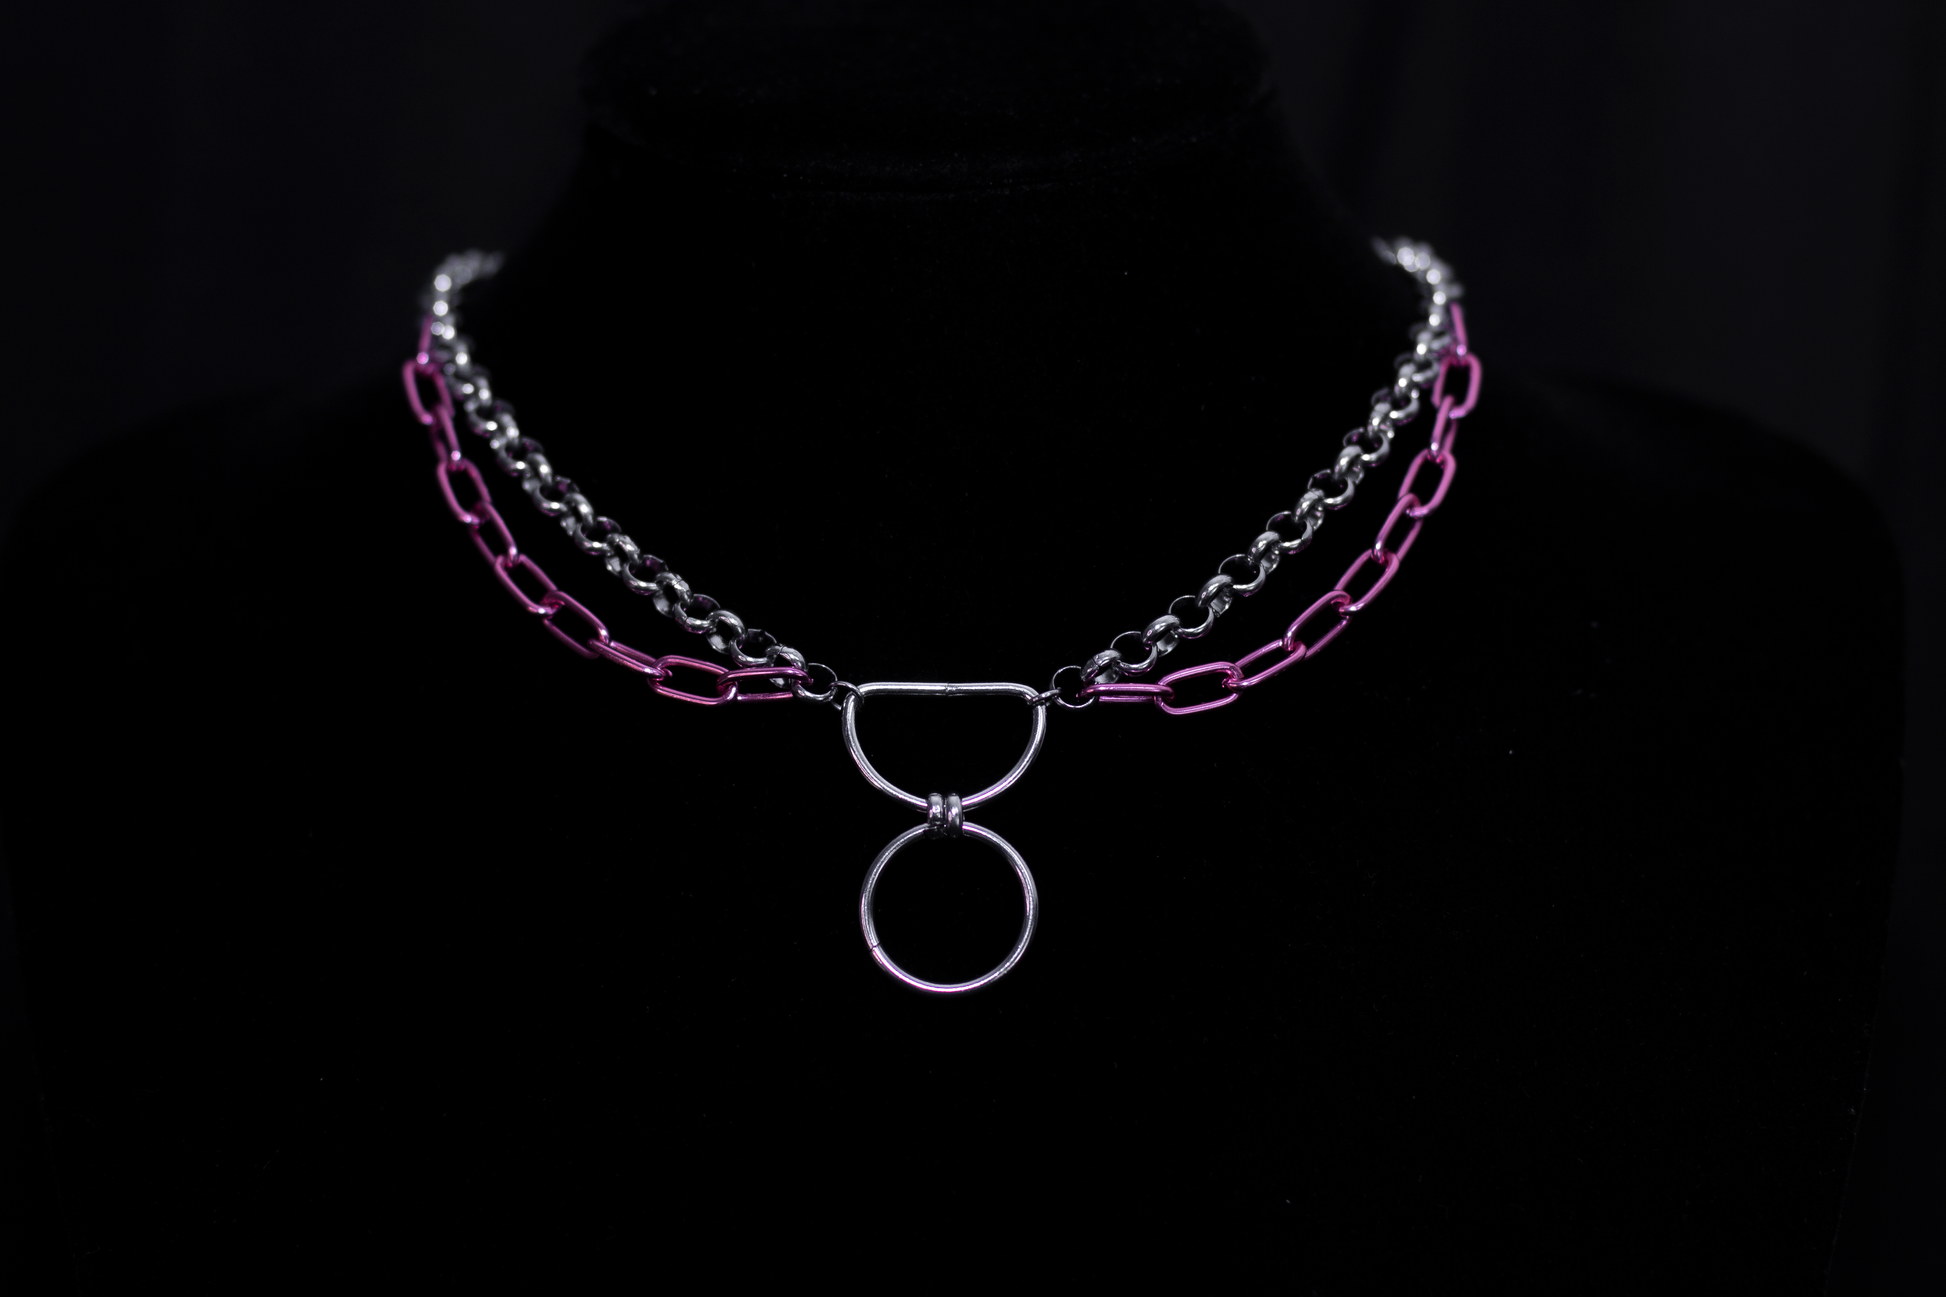 The image features a silver chain necklace with vibrant pink chain details, representing Myril Jewels' blend of neo-gothic charm and avant-garde boldness. This piece is ideal for those who adore punk jewelry or seek a distinctive goth girlfriend gift, adding a pop of color to a minimal goth ensemble or making a statement at rave parties and festivals.